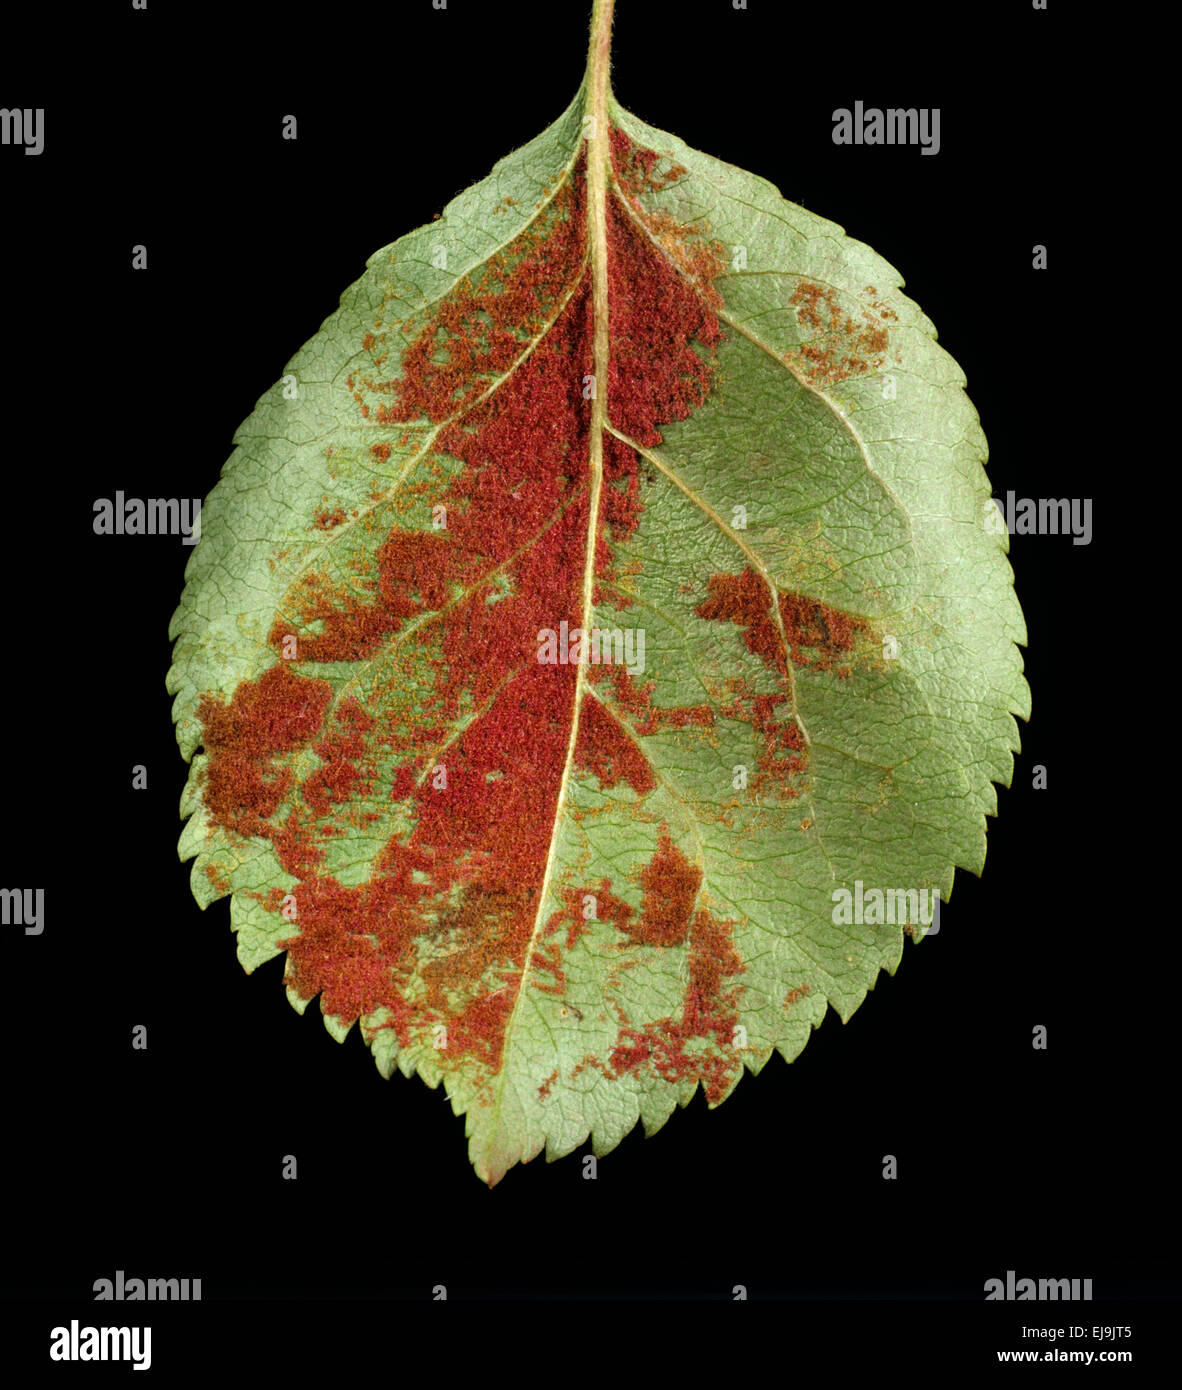 Red velvet appearance of Eriophyid mite galls on the underside of an apple leaf Stock Photo